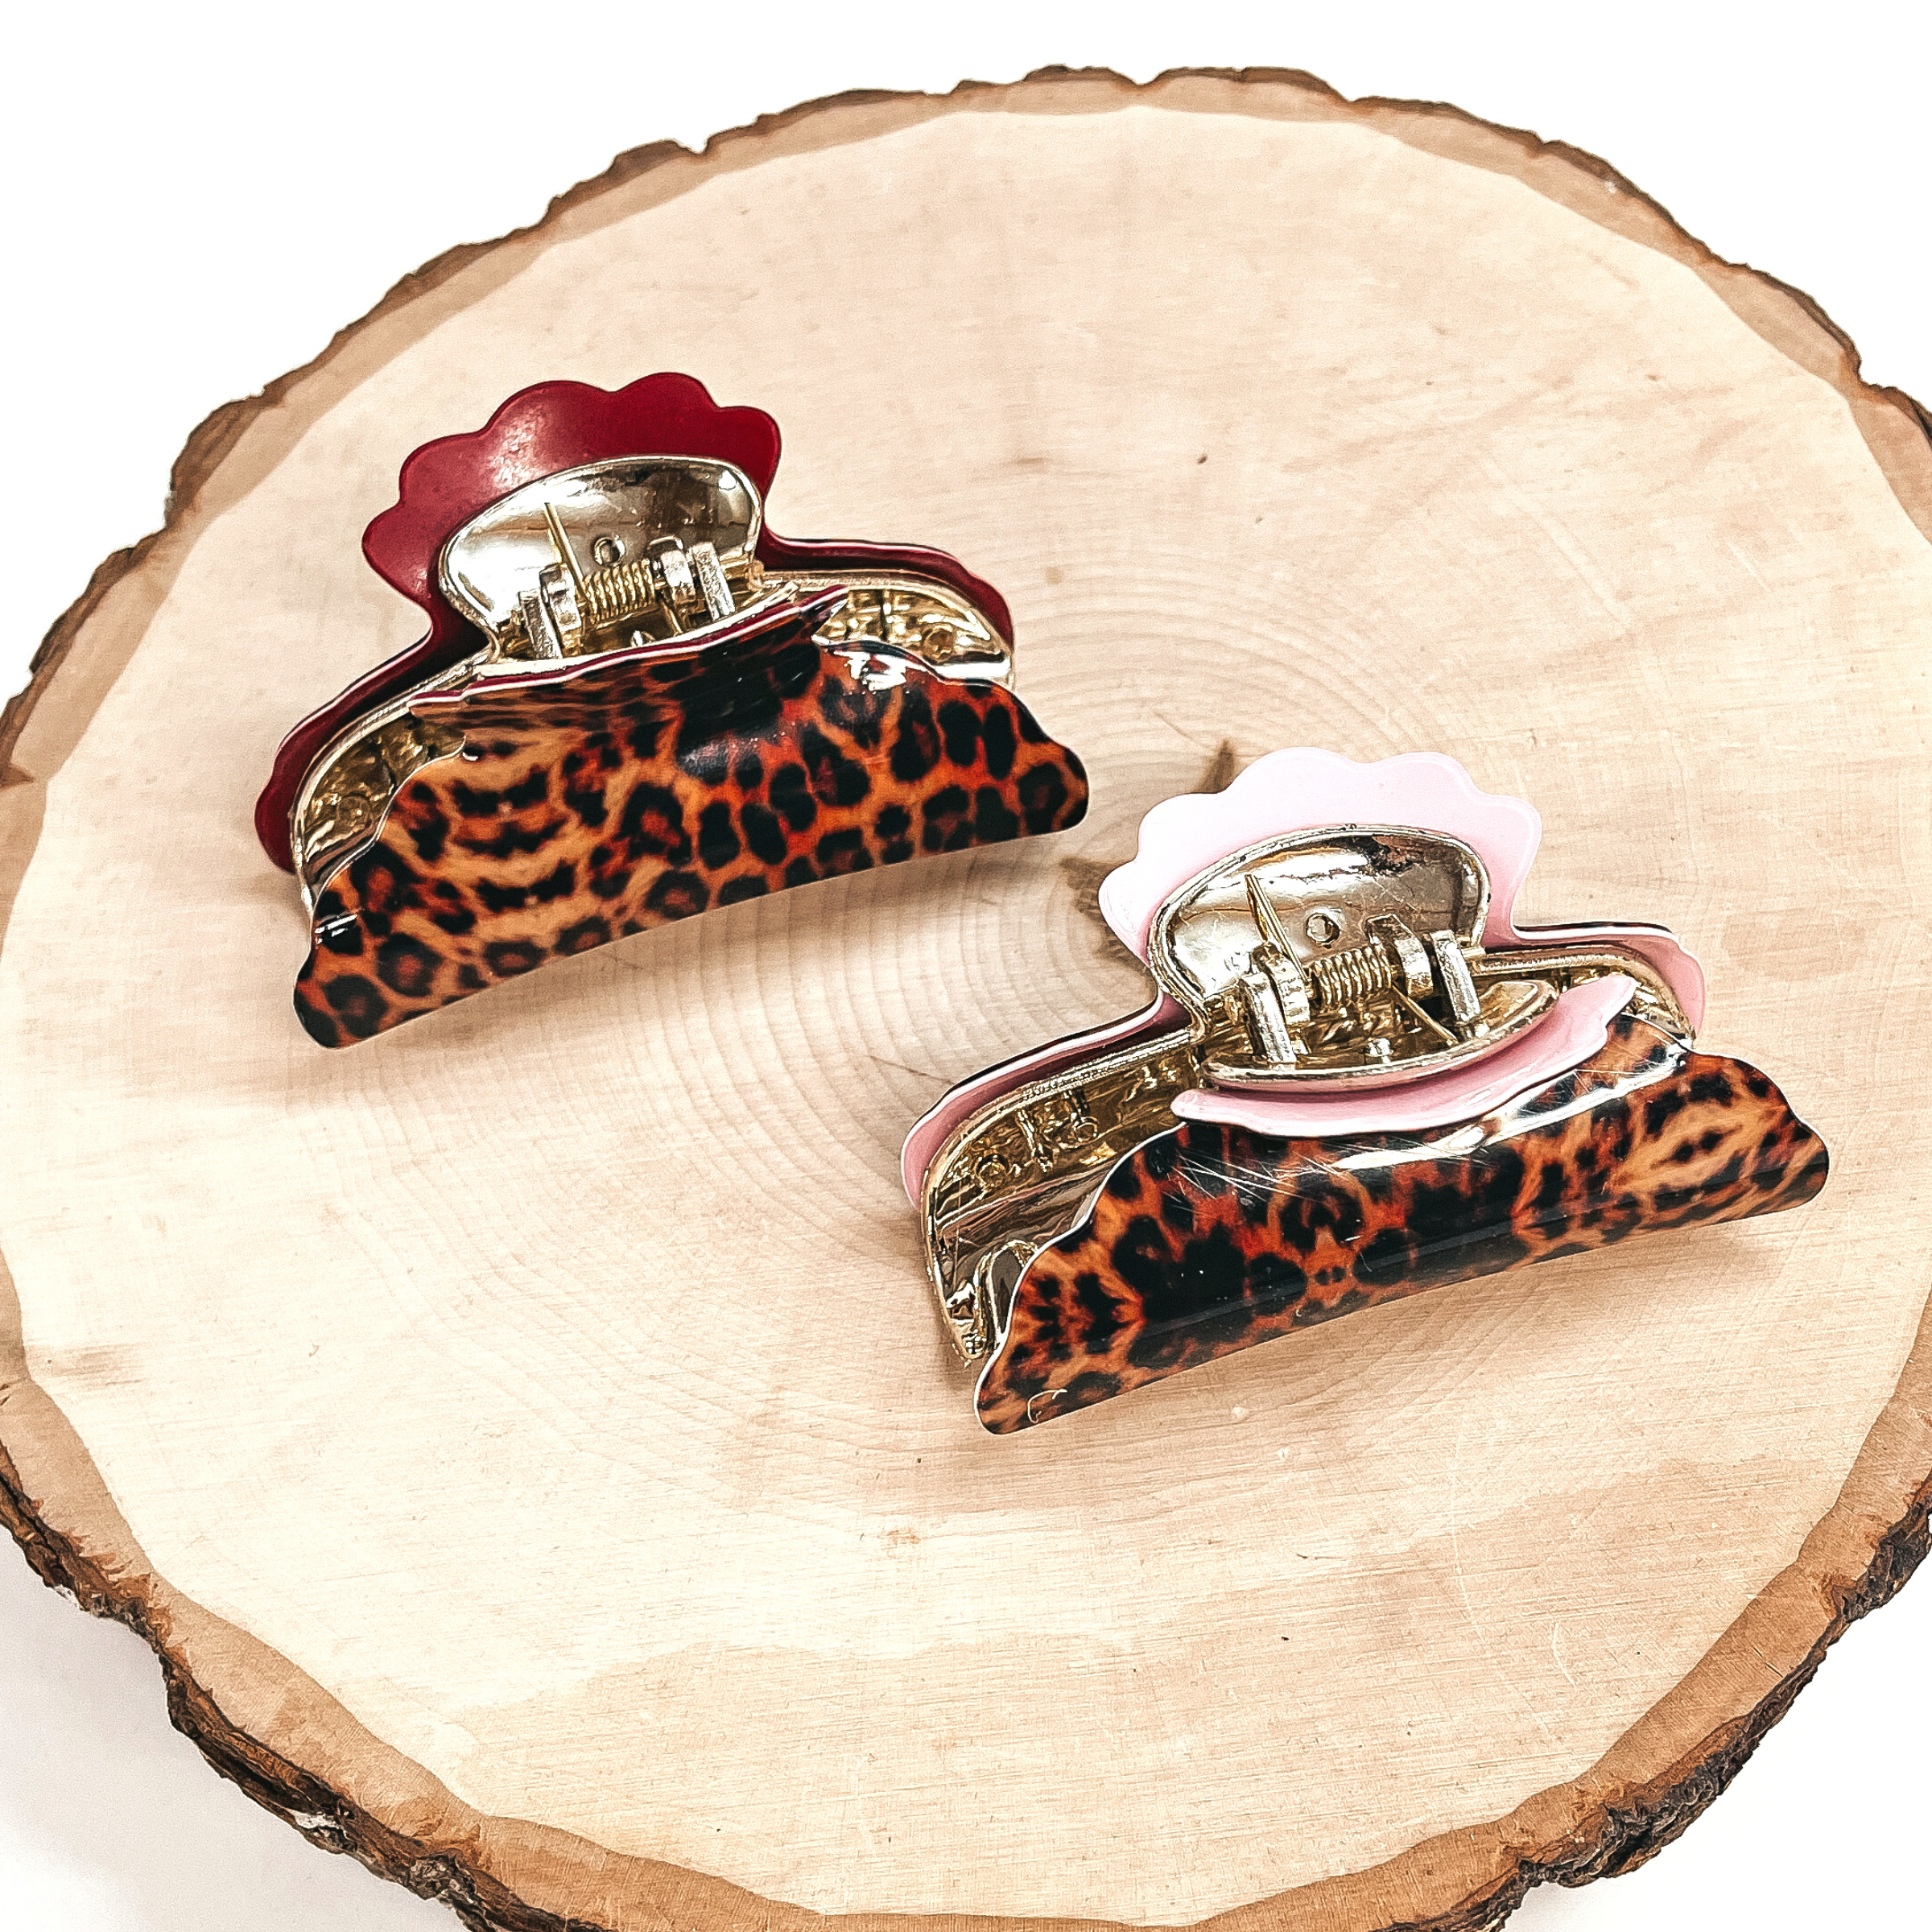 There are two orange leopard print hair clips, one is in red and the other is light  pink with gold tone inlay. Both of these hair clips are taken on a slab of wood and  a white background.